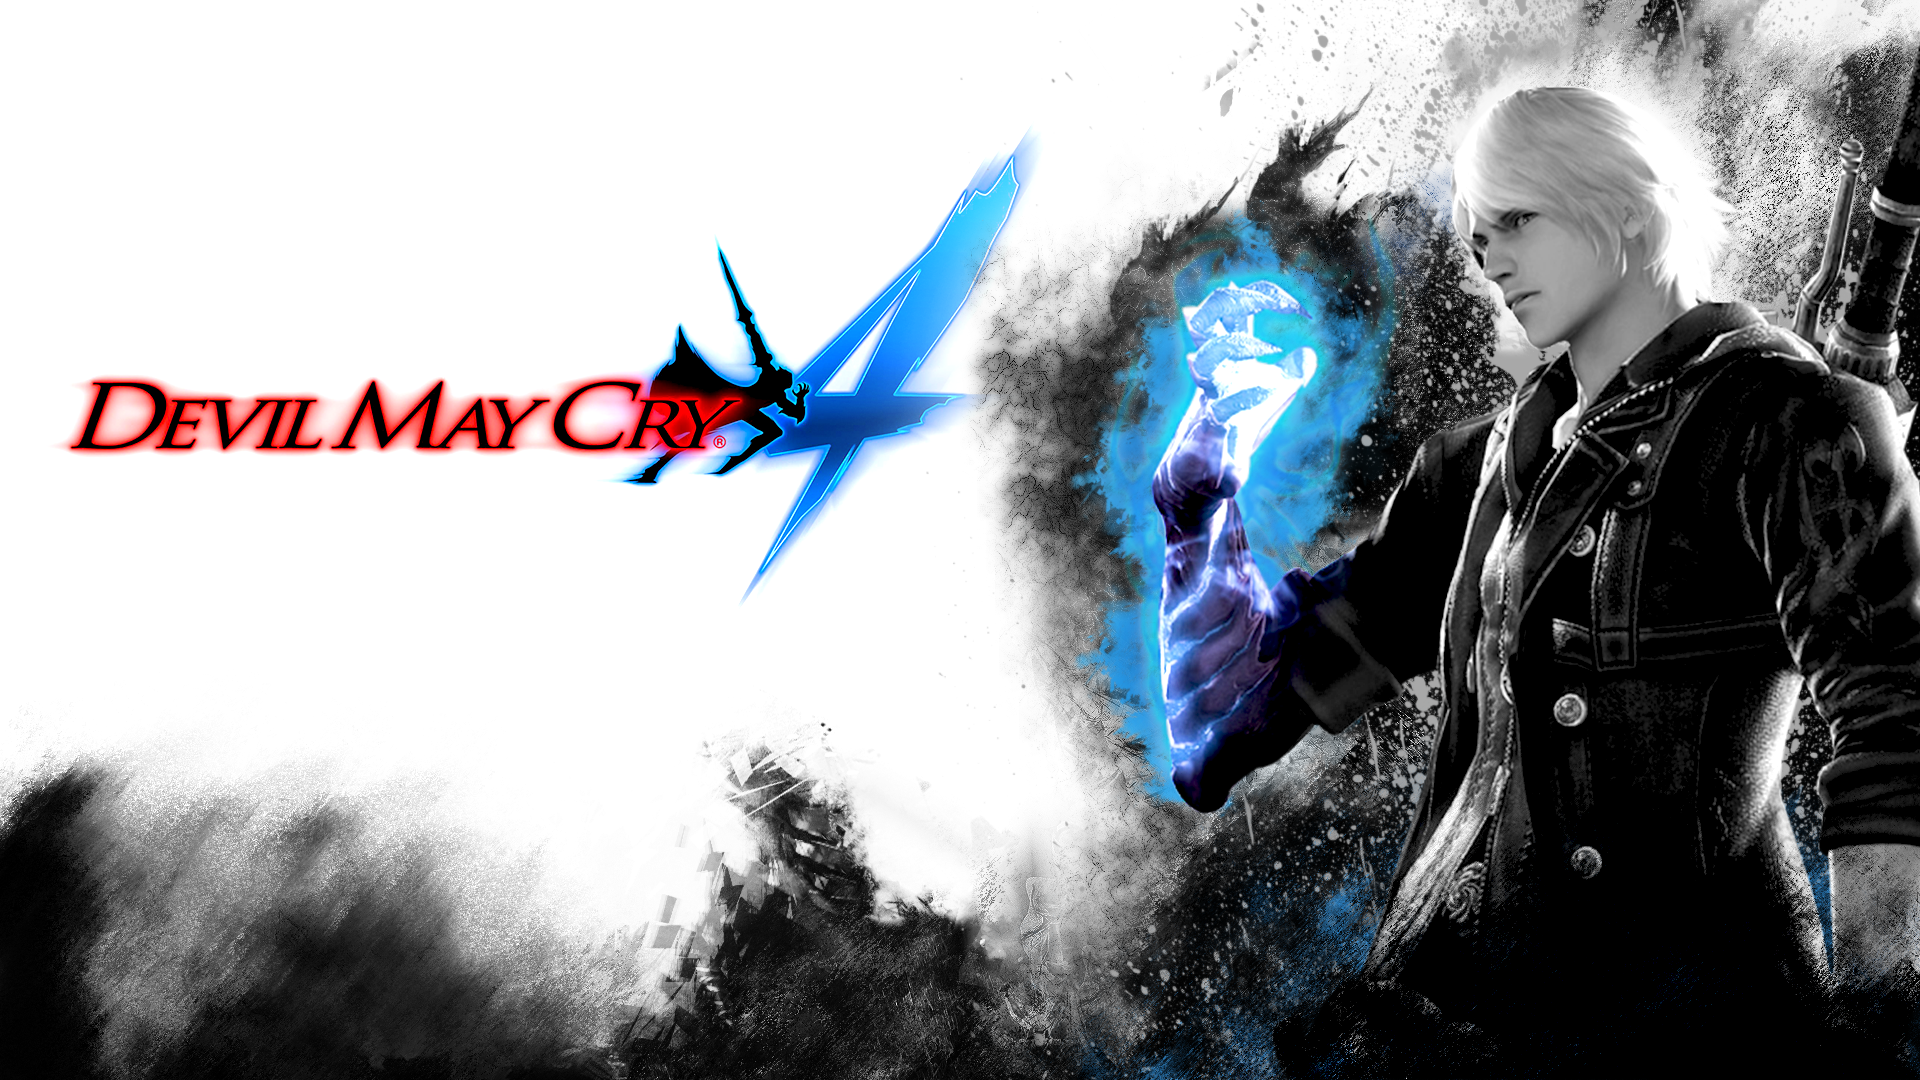 11 Dante (Devil May Cry) HD Wallpapers | Backgrounds - Wallpaper Abyss